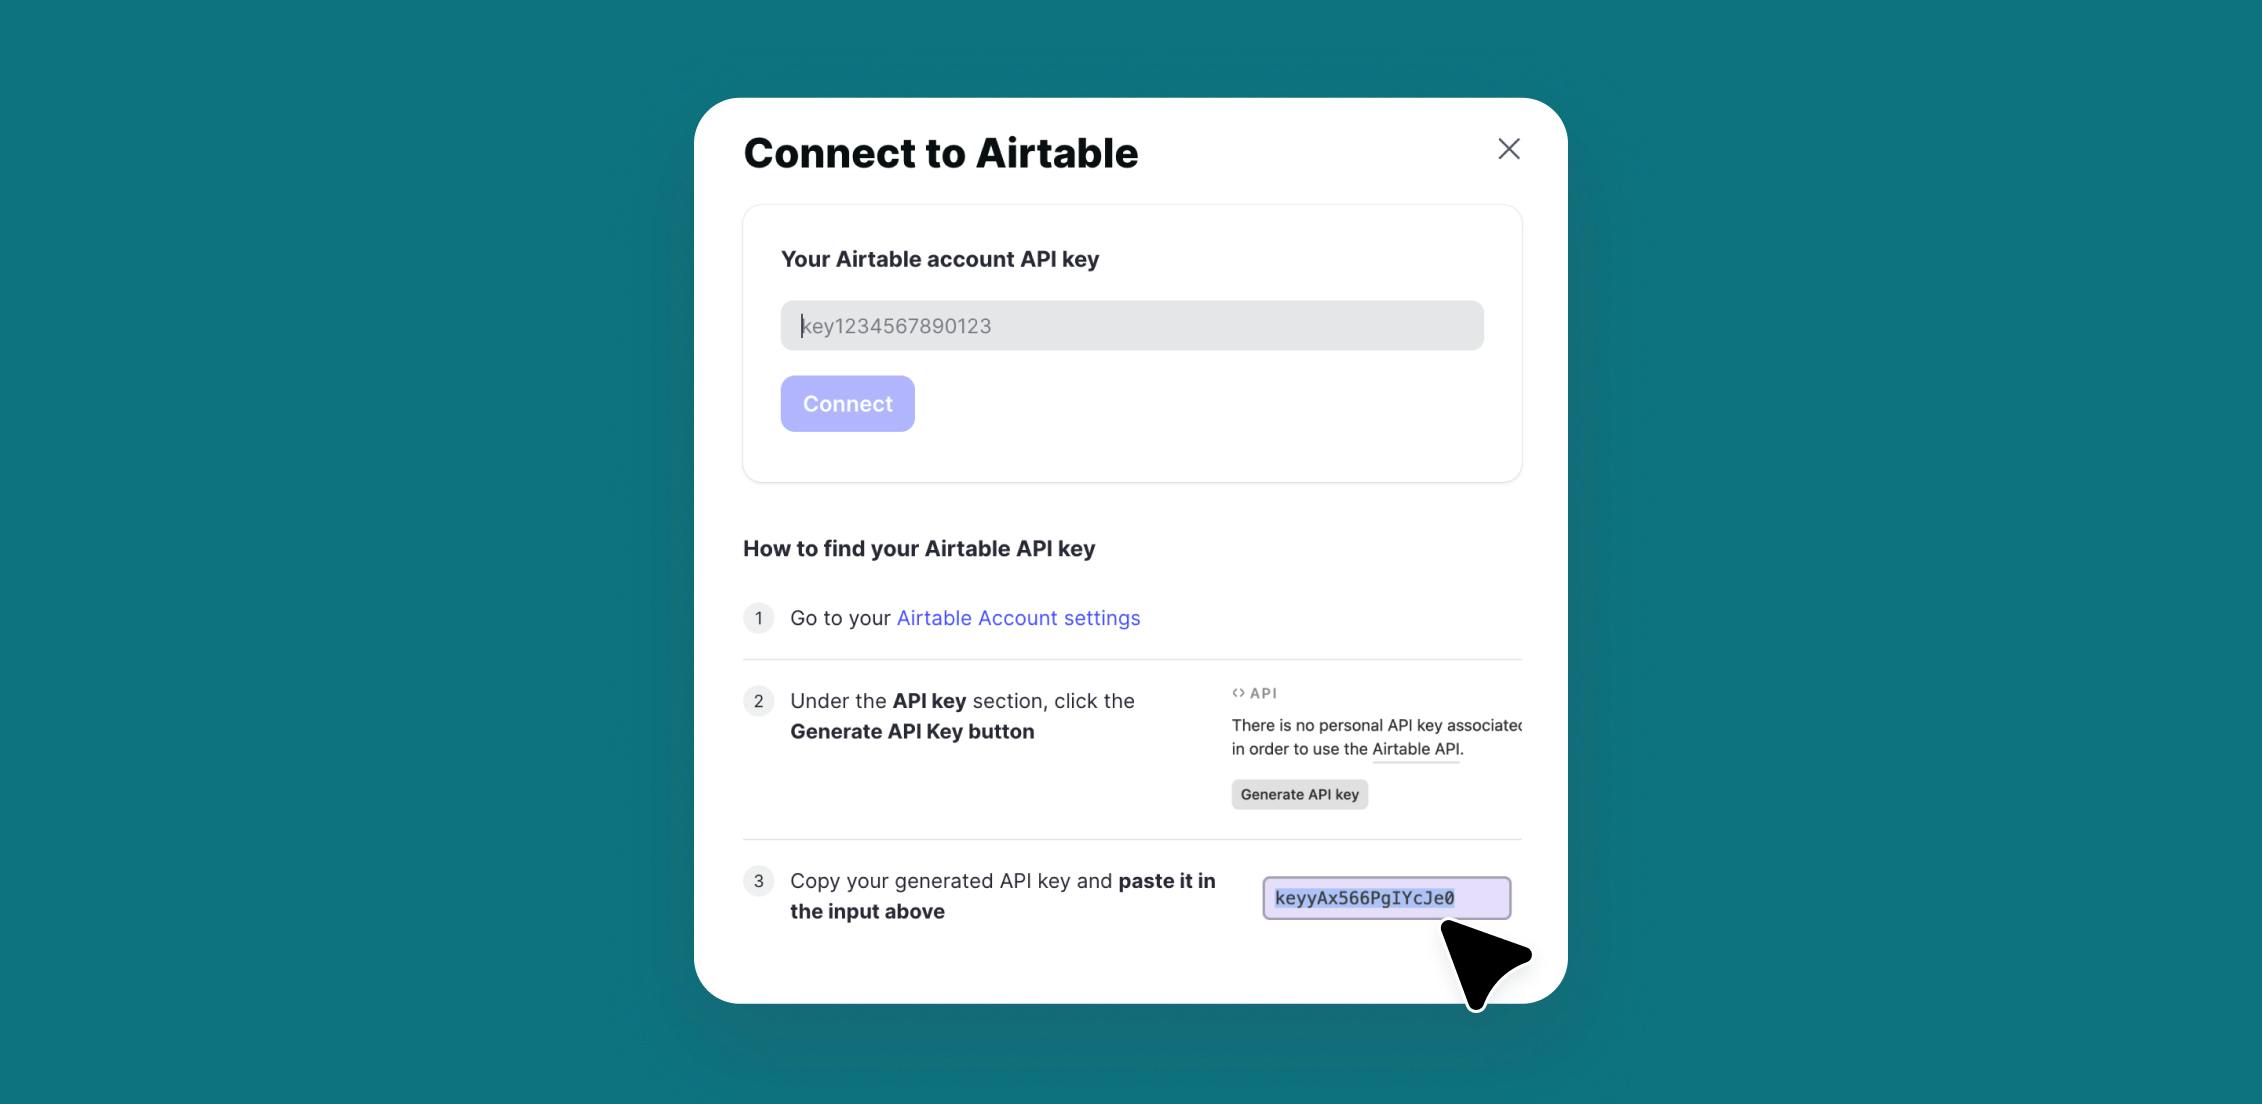 Connect to Airtable by providing your API key, pasting it into Glide, and selecting your desired Airtable database.